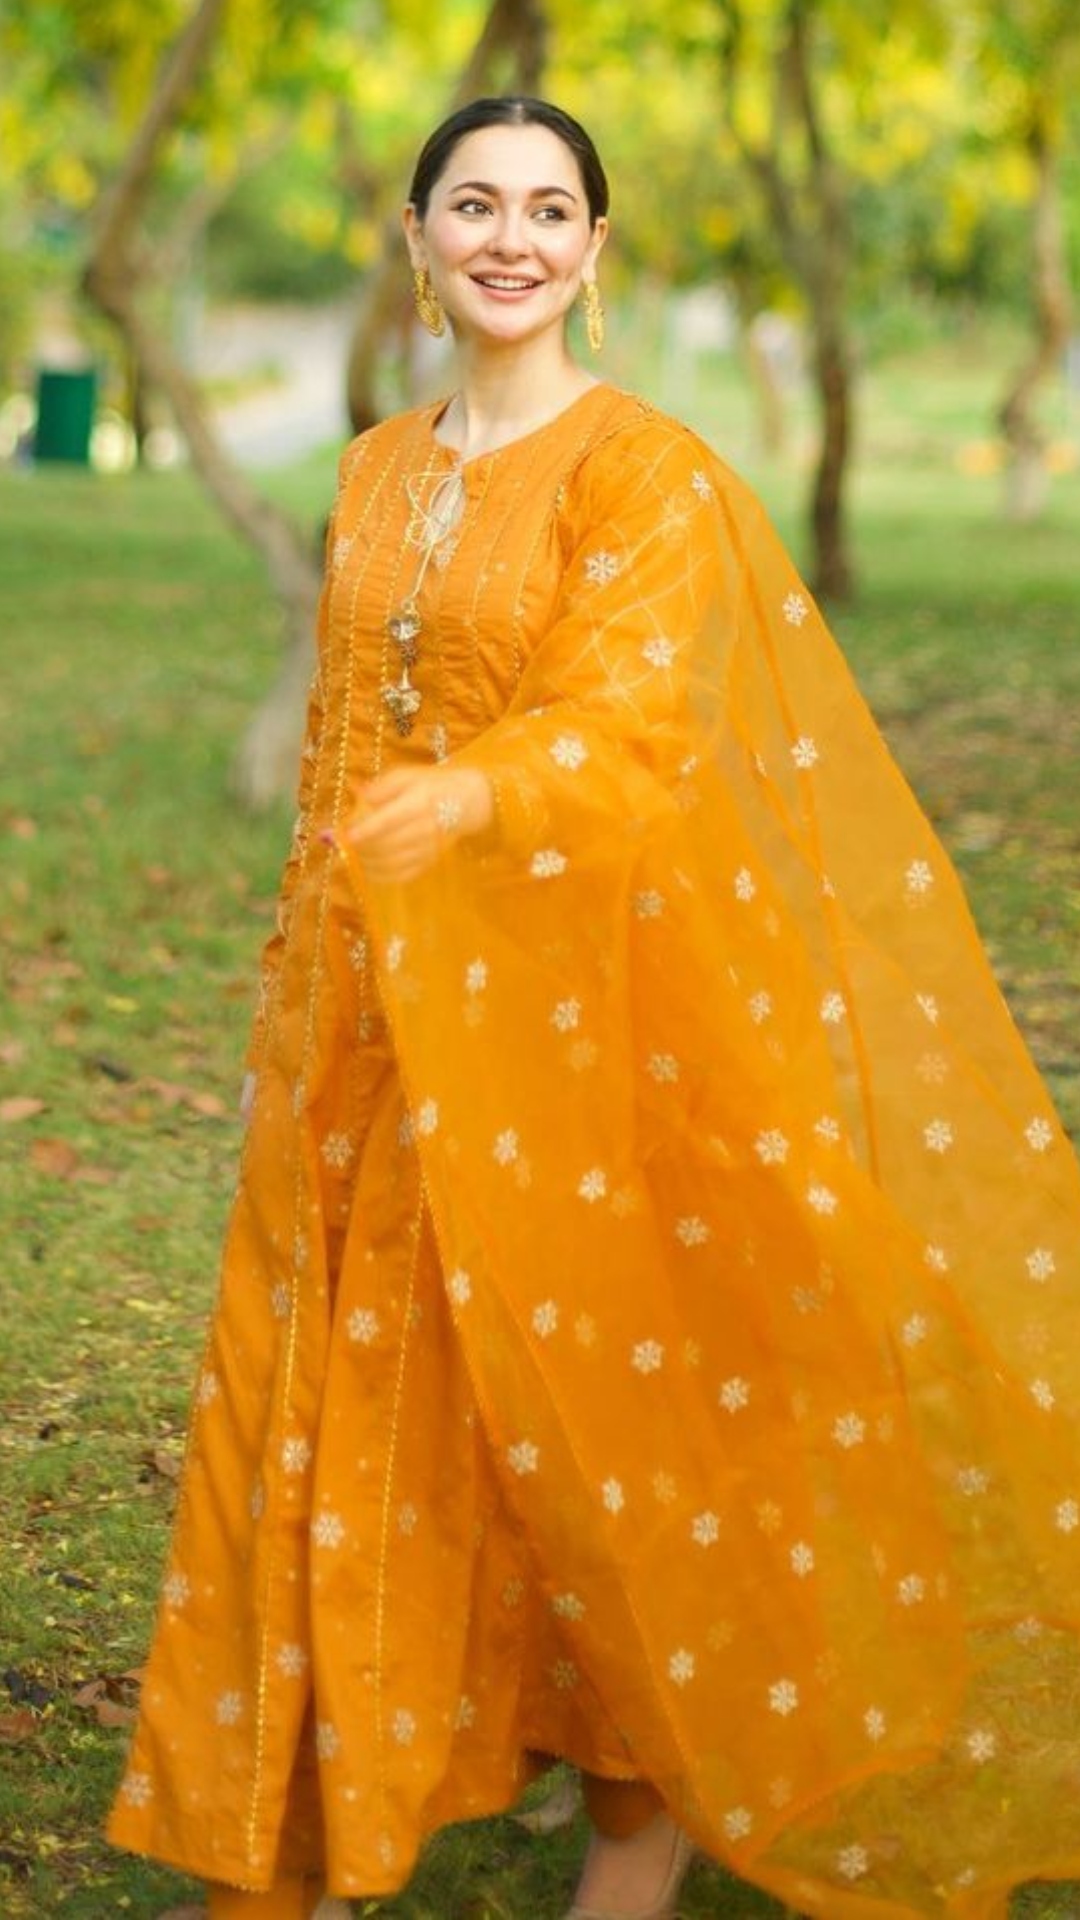 Pakistani actress Hania Aamir decks up in yellow for Eid-ul-Adha. See her other traditional outfits for the festival.  